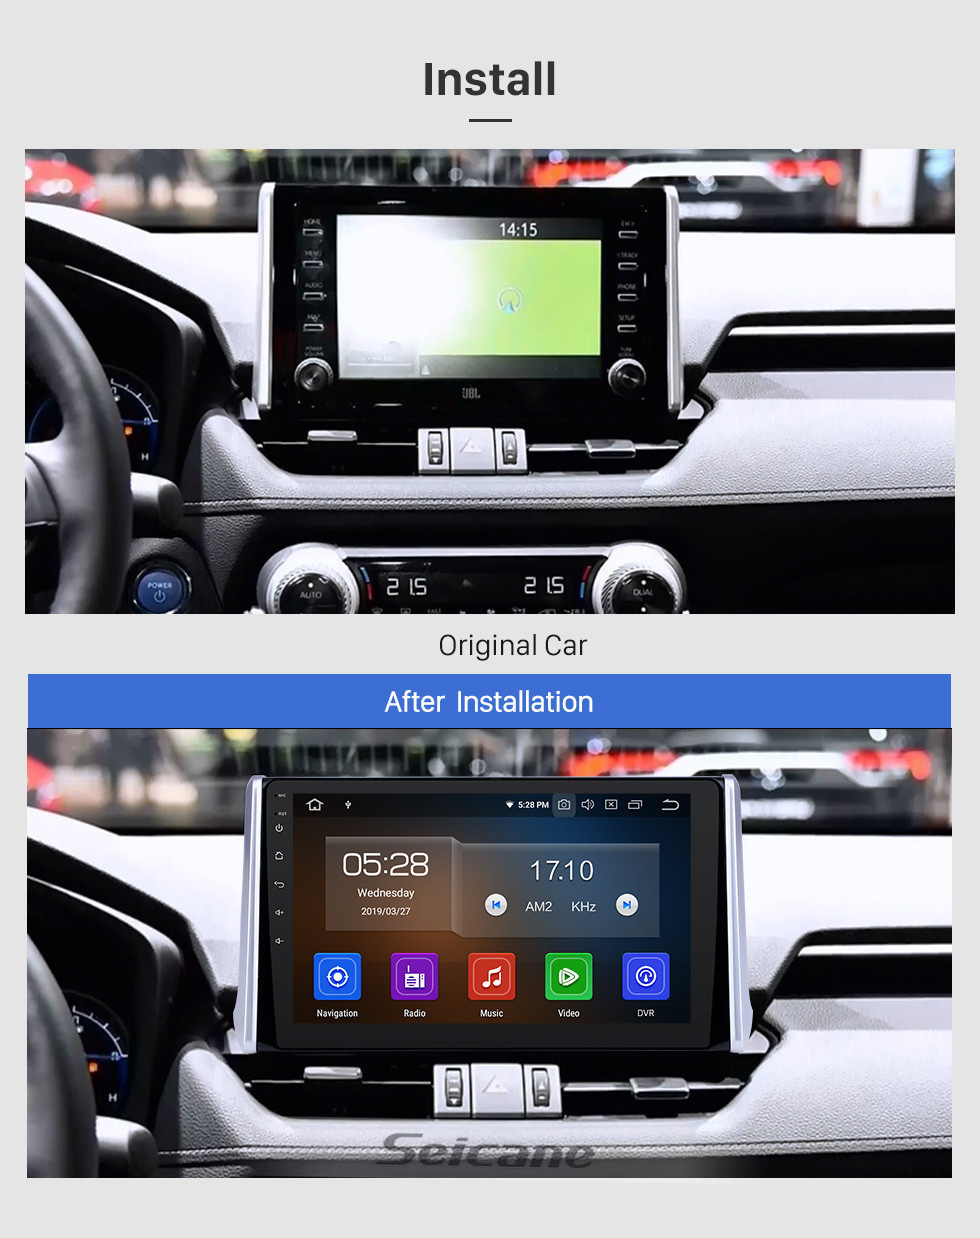 Seicane 10.1 inch Android 13.0 GPS Navigation Radio for 2019-2021 Toyota RAV4 with HD Touchscreen Carplay Bluetooth WIFI USB AUX support Mirror Link OBD2 SWC